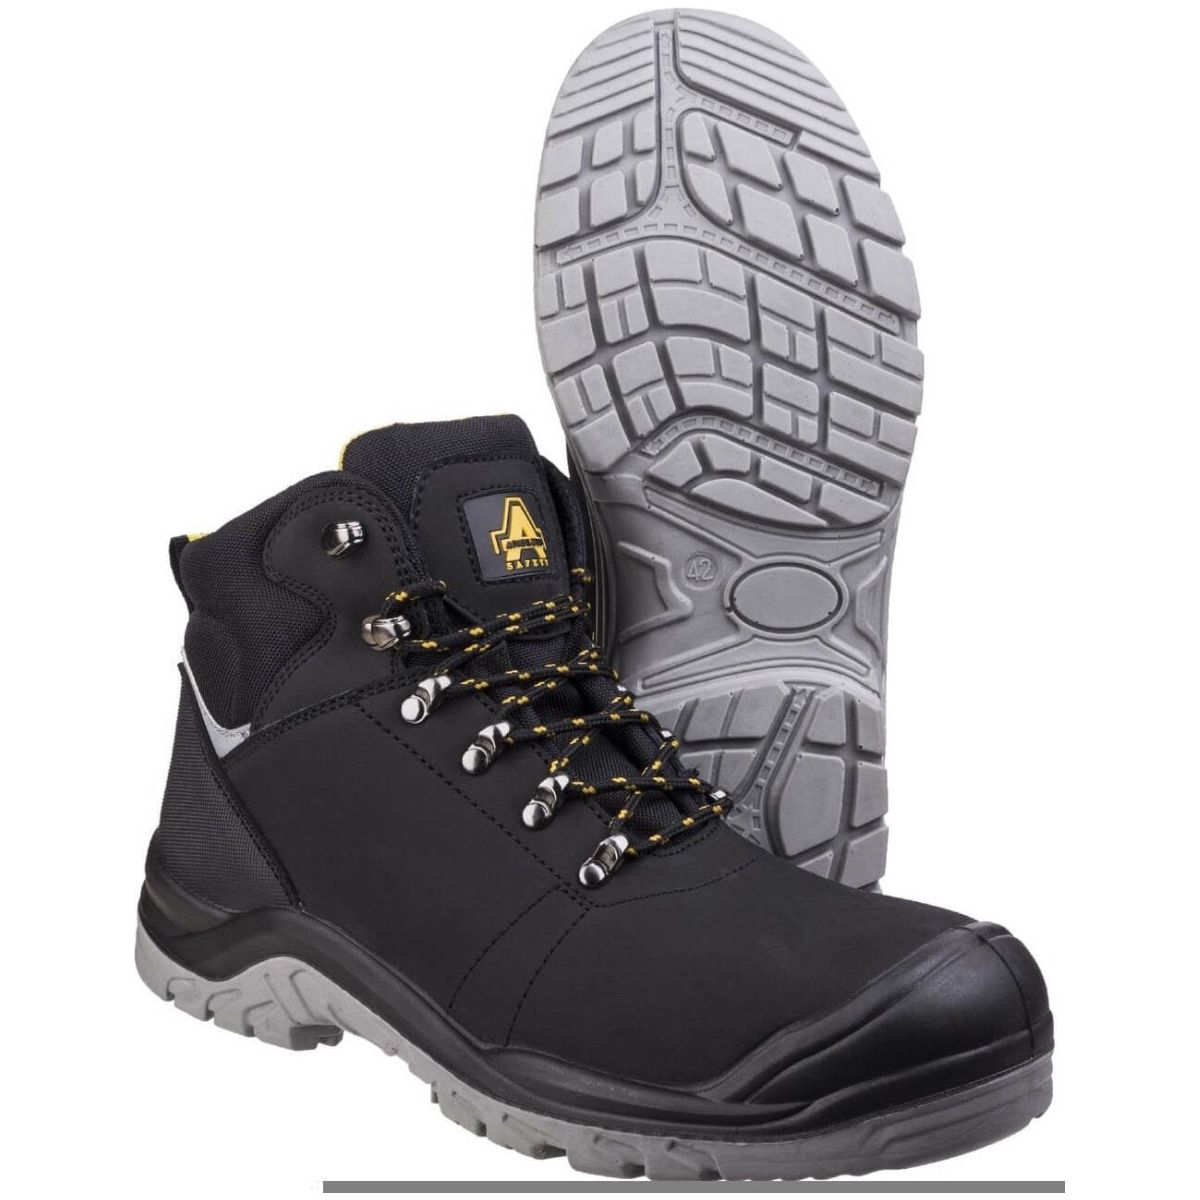 Amblers As252 Water-Resistant Leather Safety Boots Mens - workweargurus.com